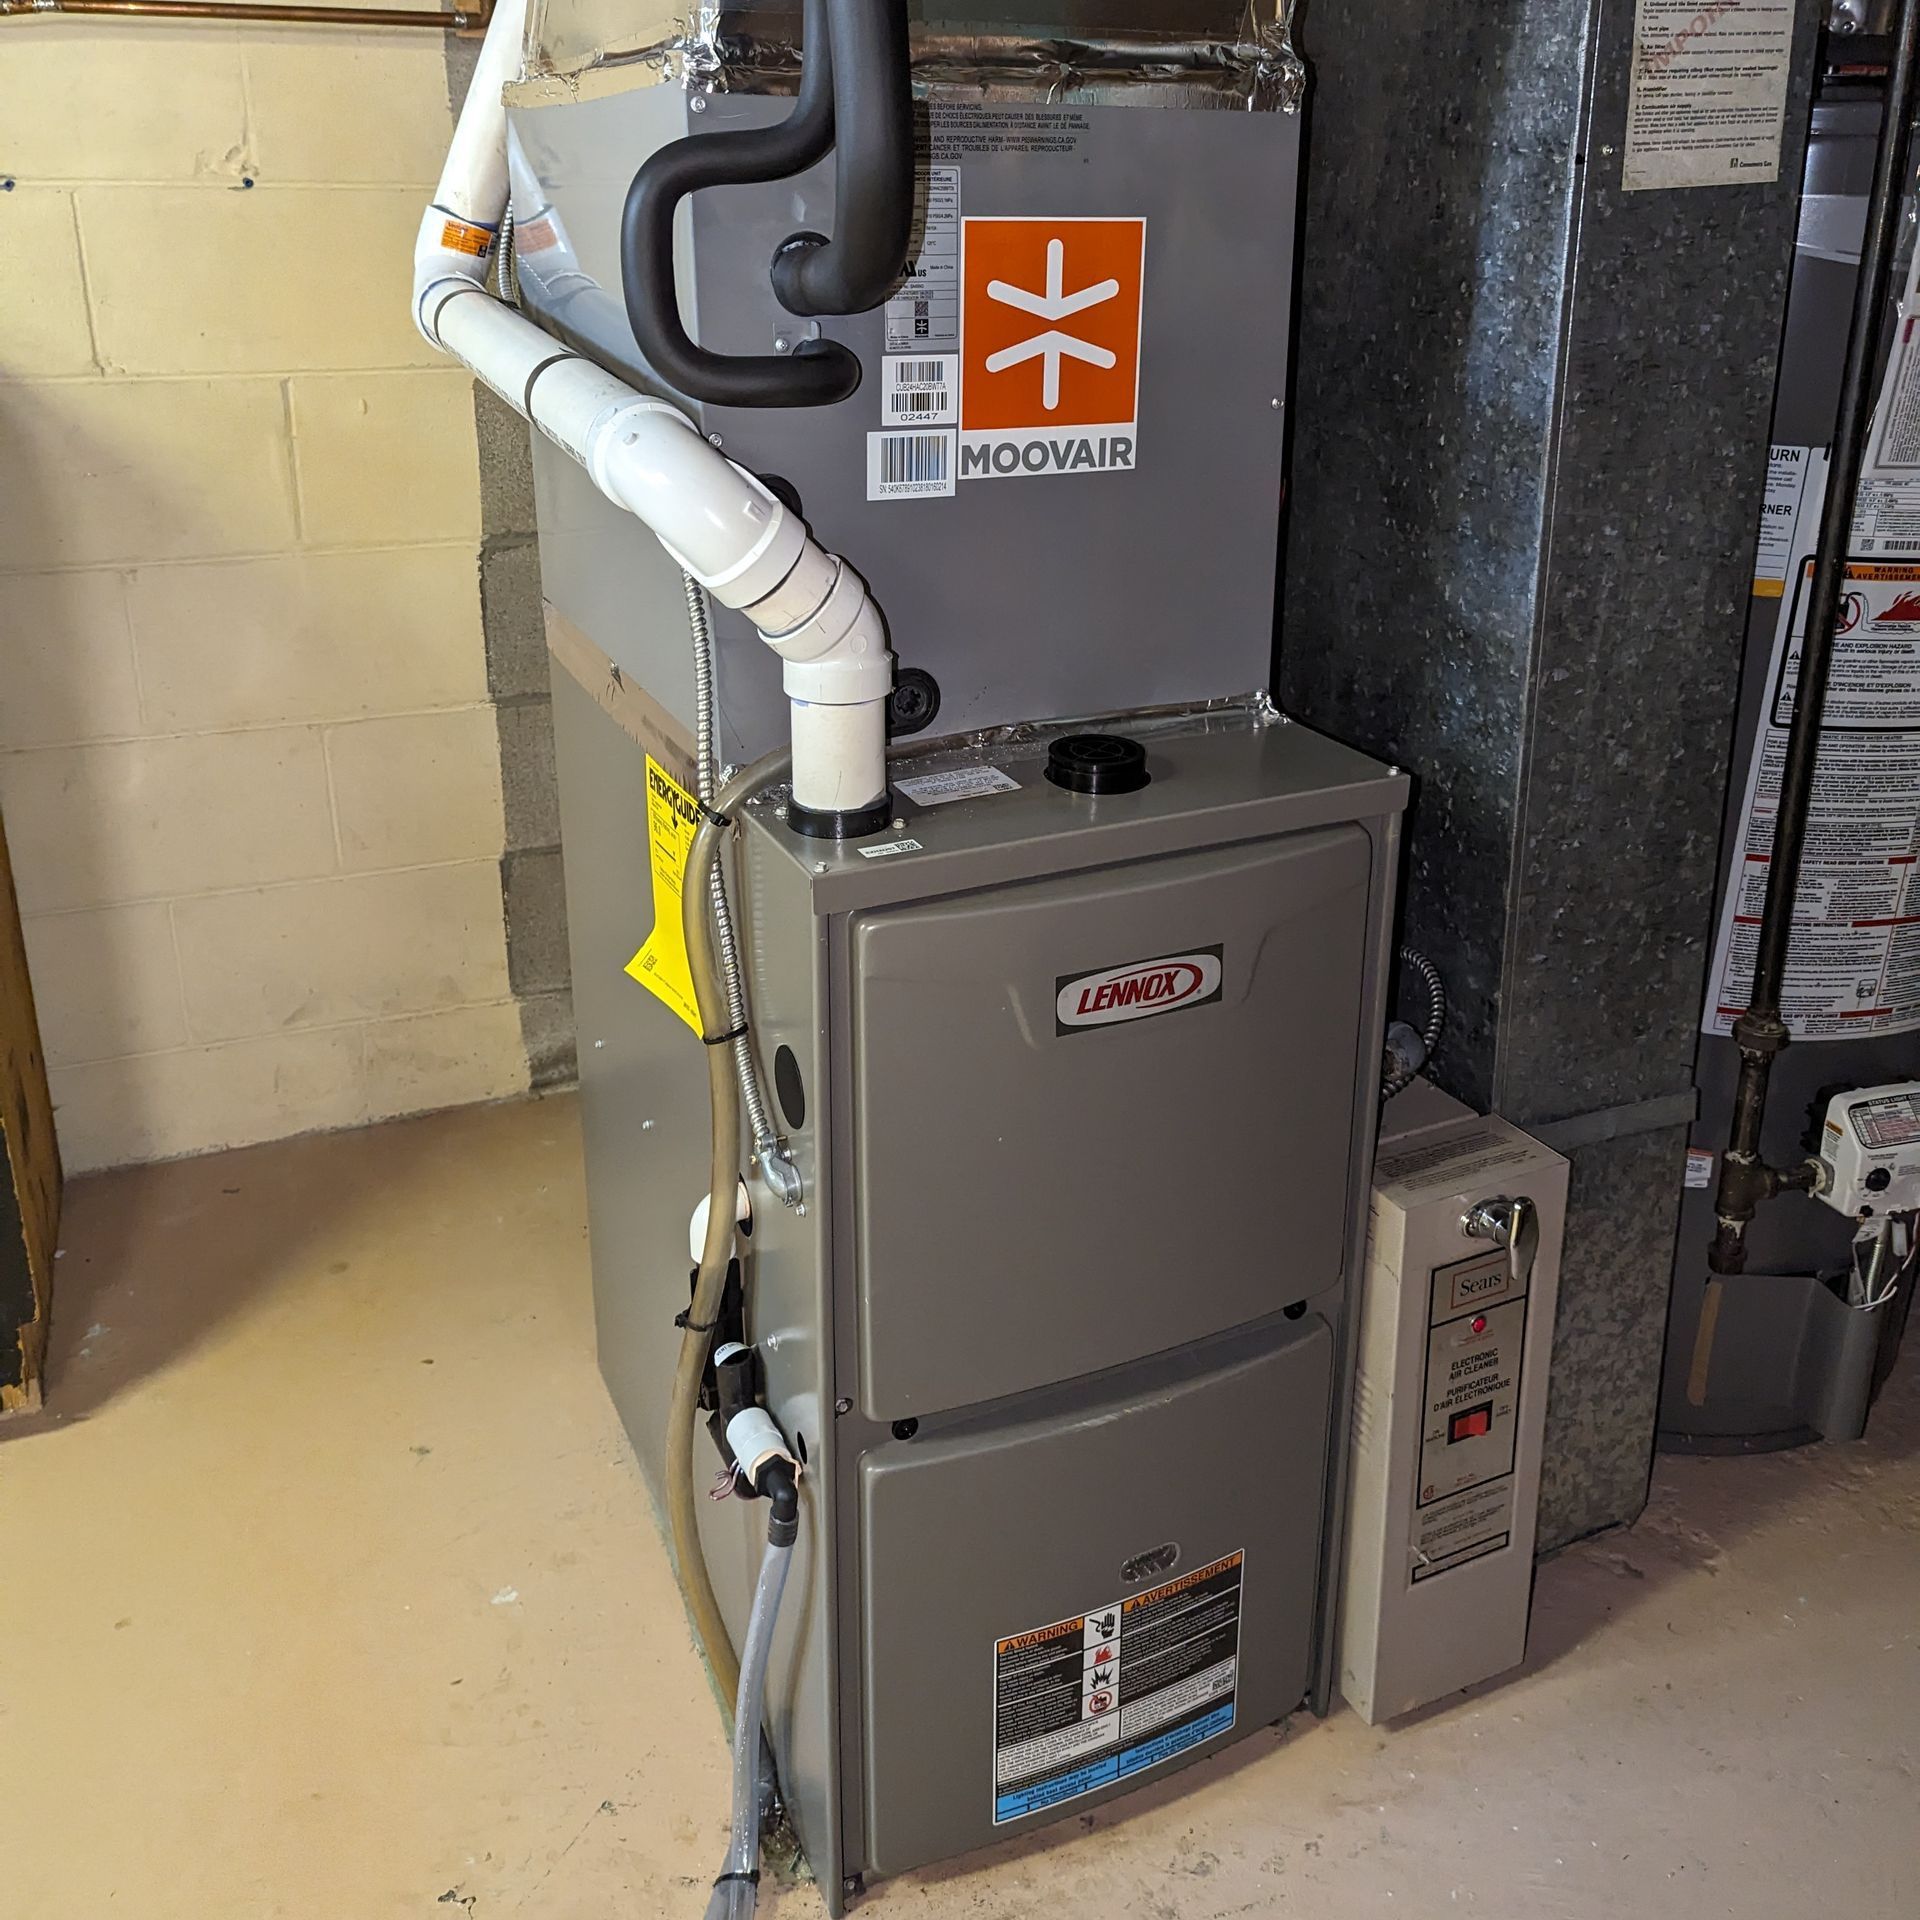 a gray furnace with an orange x on it